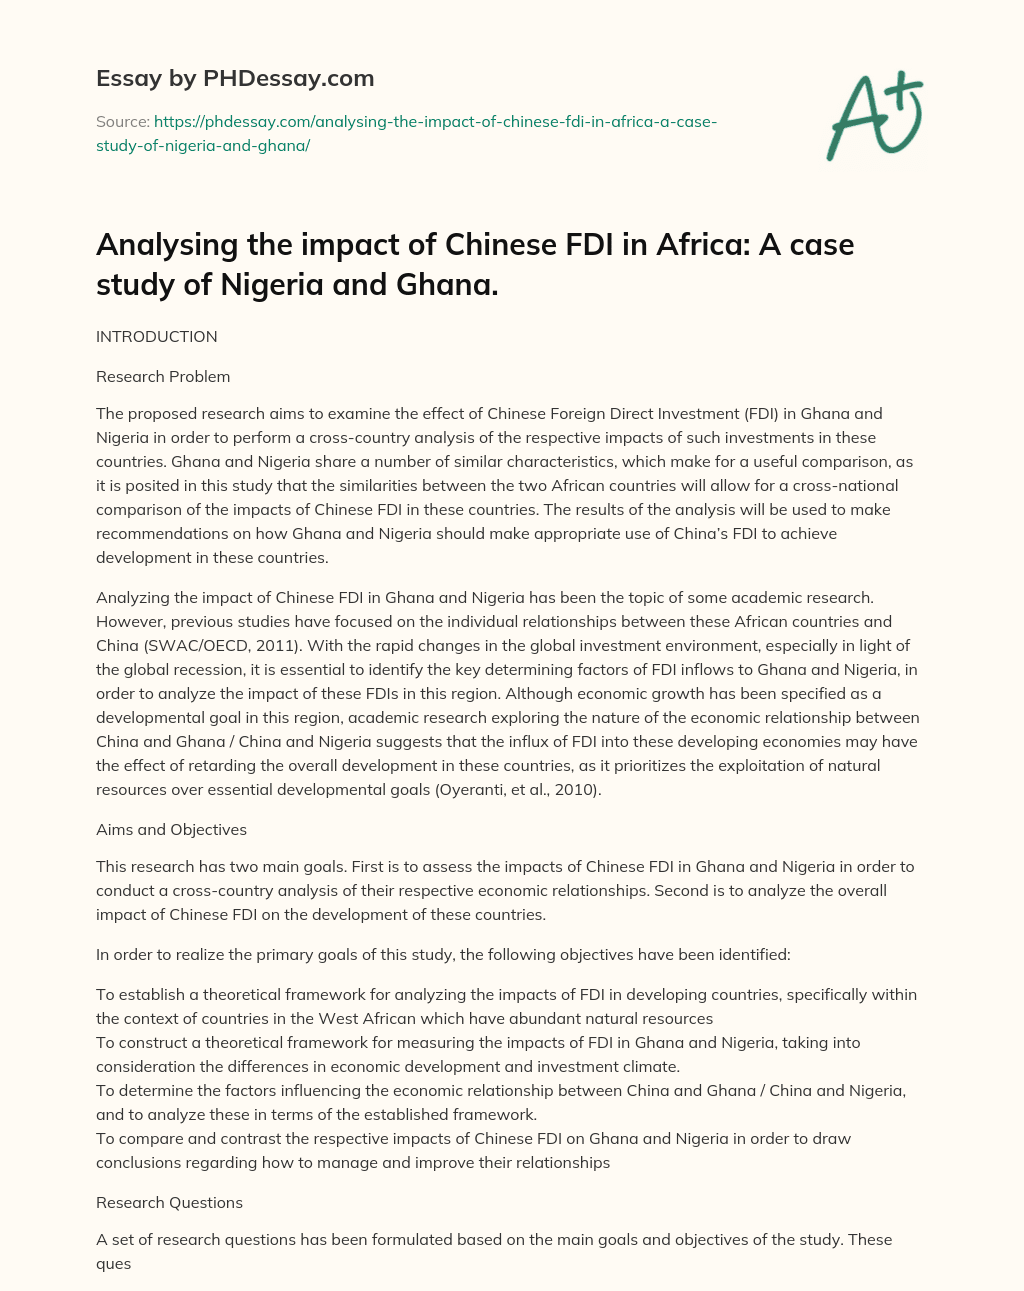 Analysing the impact of Chinese FDI in Africa: A case study of Nigeria and Ghana. essay